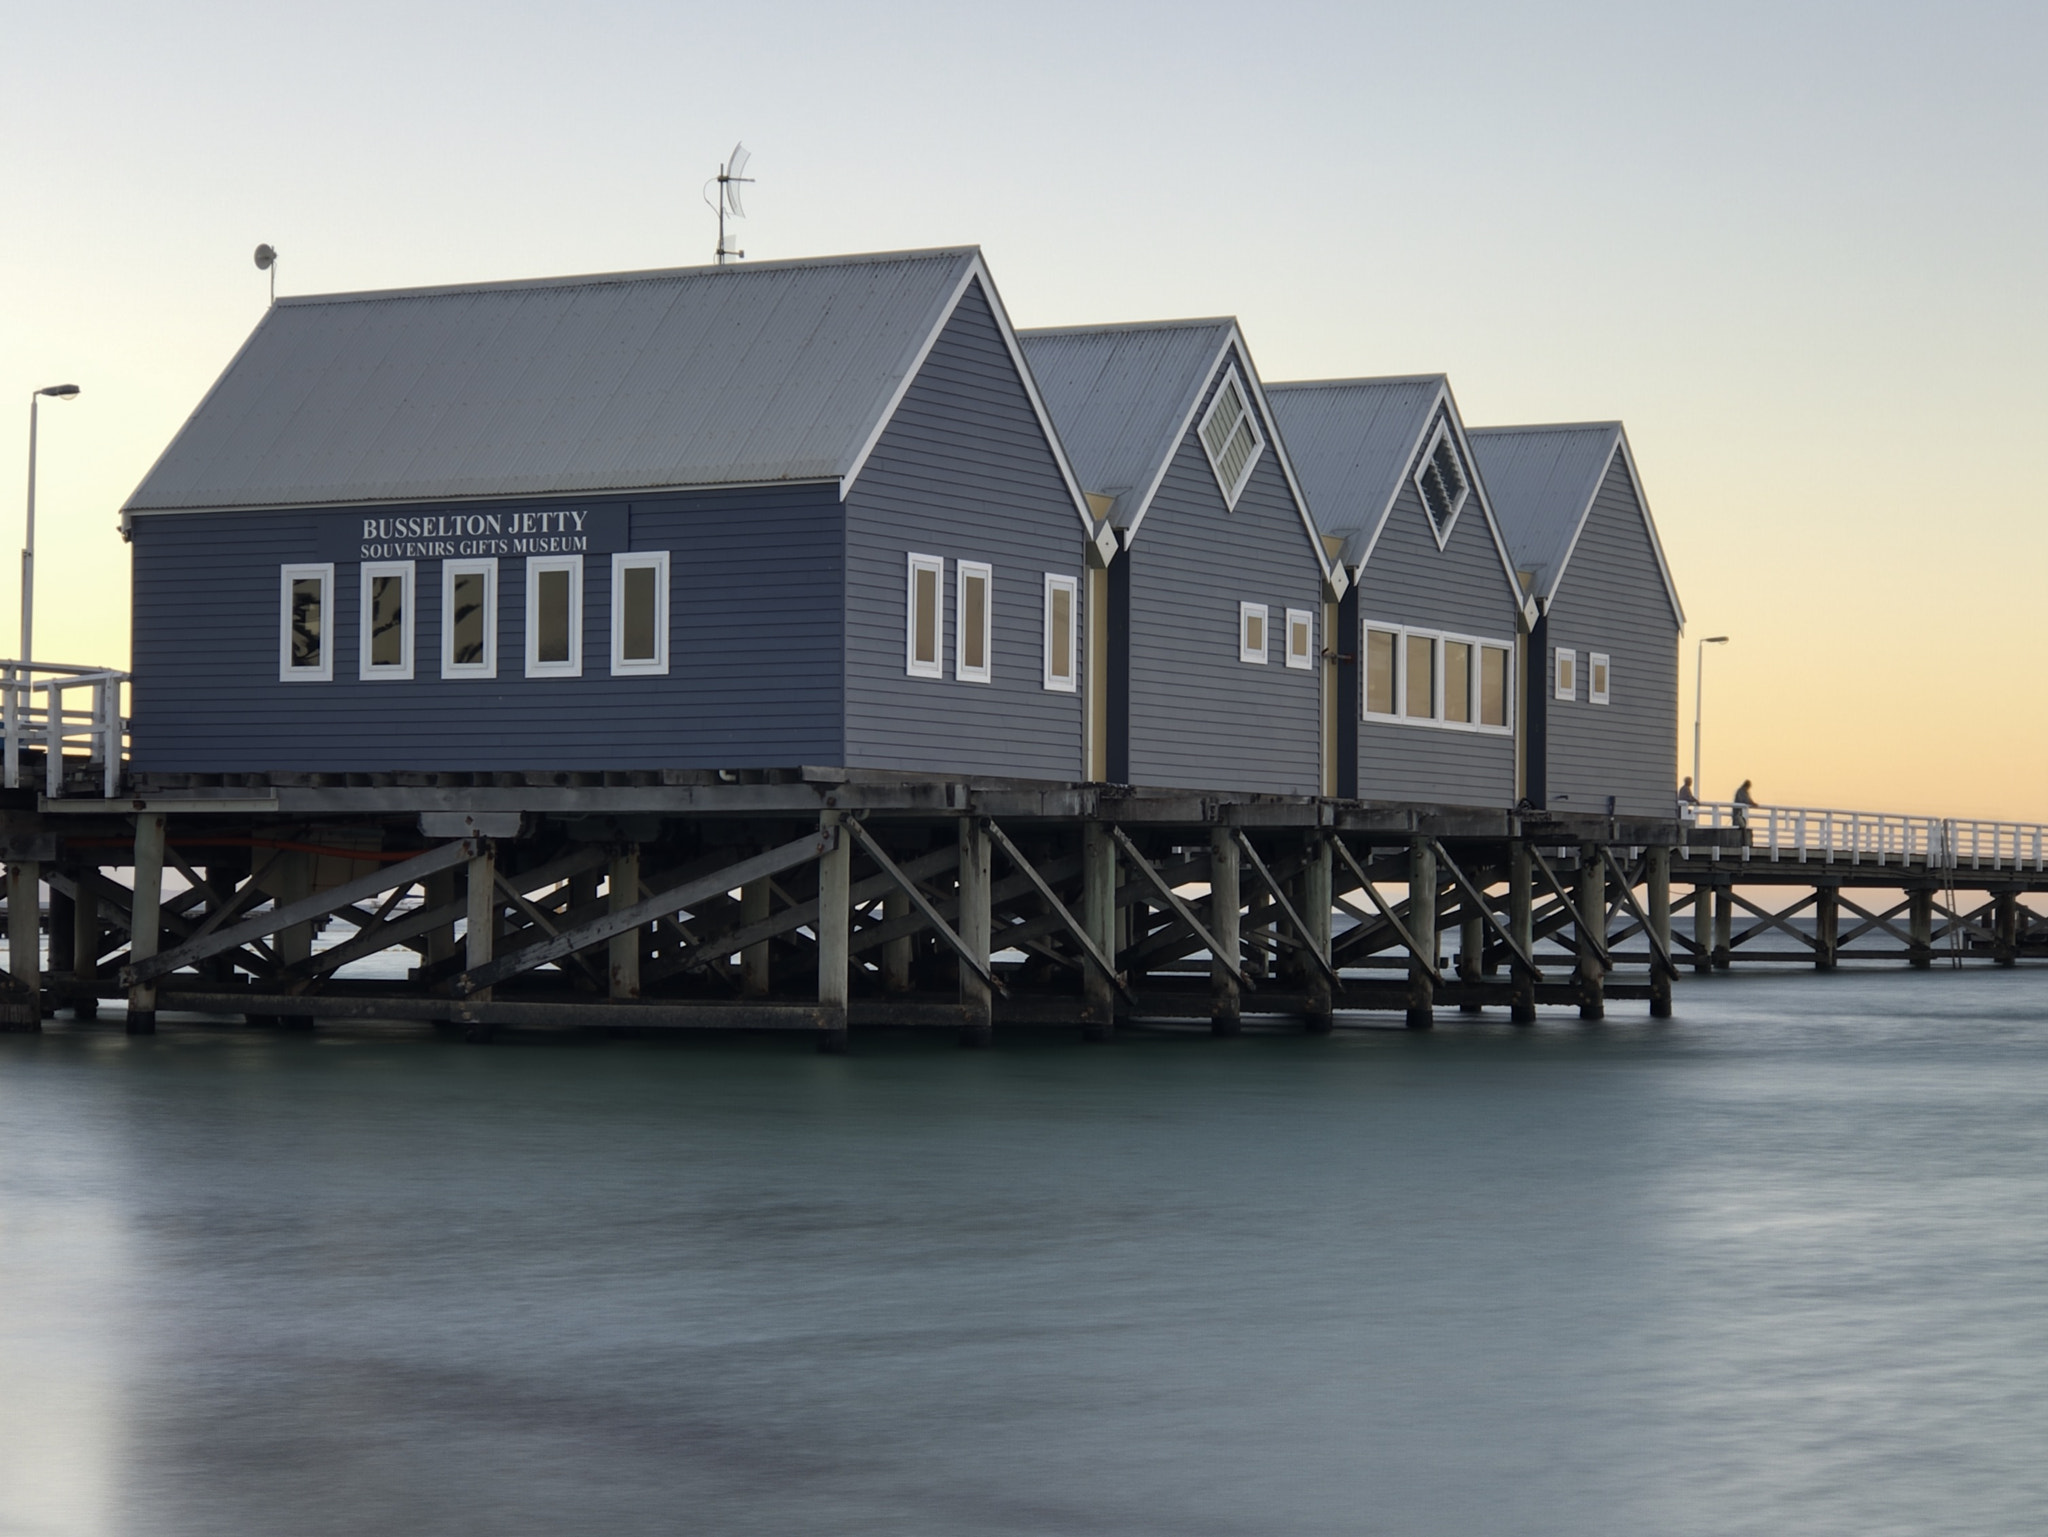 iPhone 7 Plus back camera 6.6mm f/2.8 sample photo. A south west wa icon: the busselton jetty boatshed photography